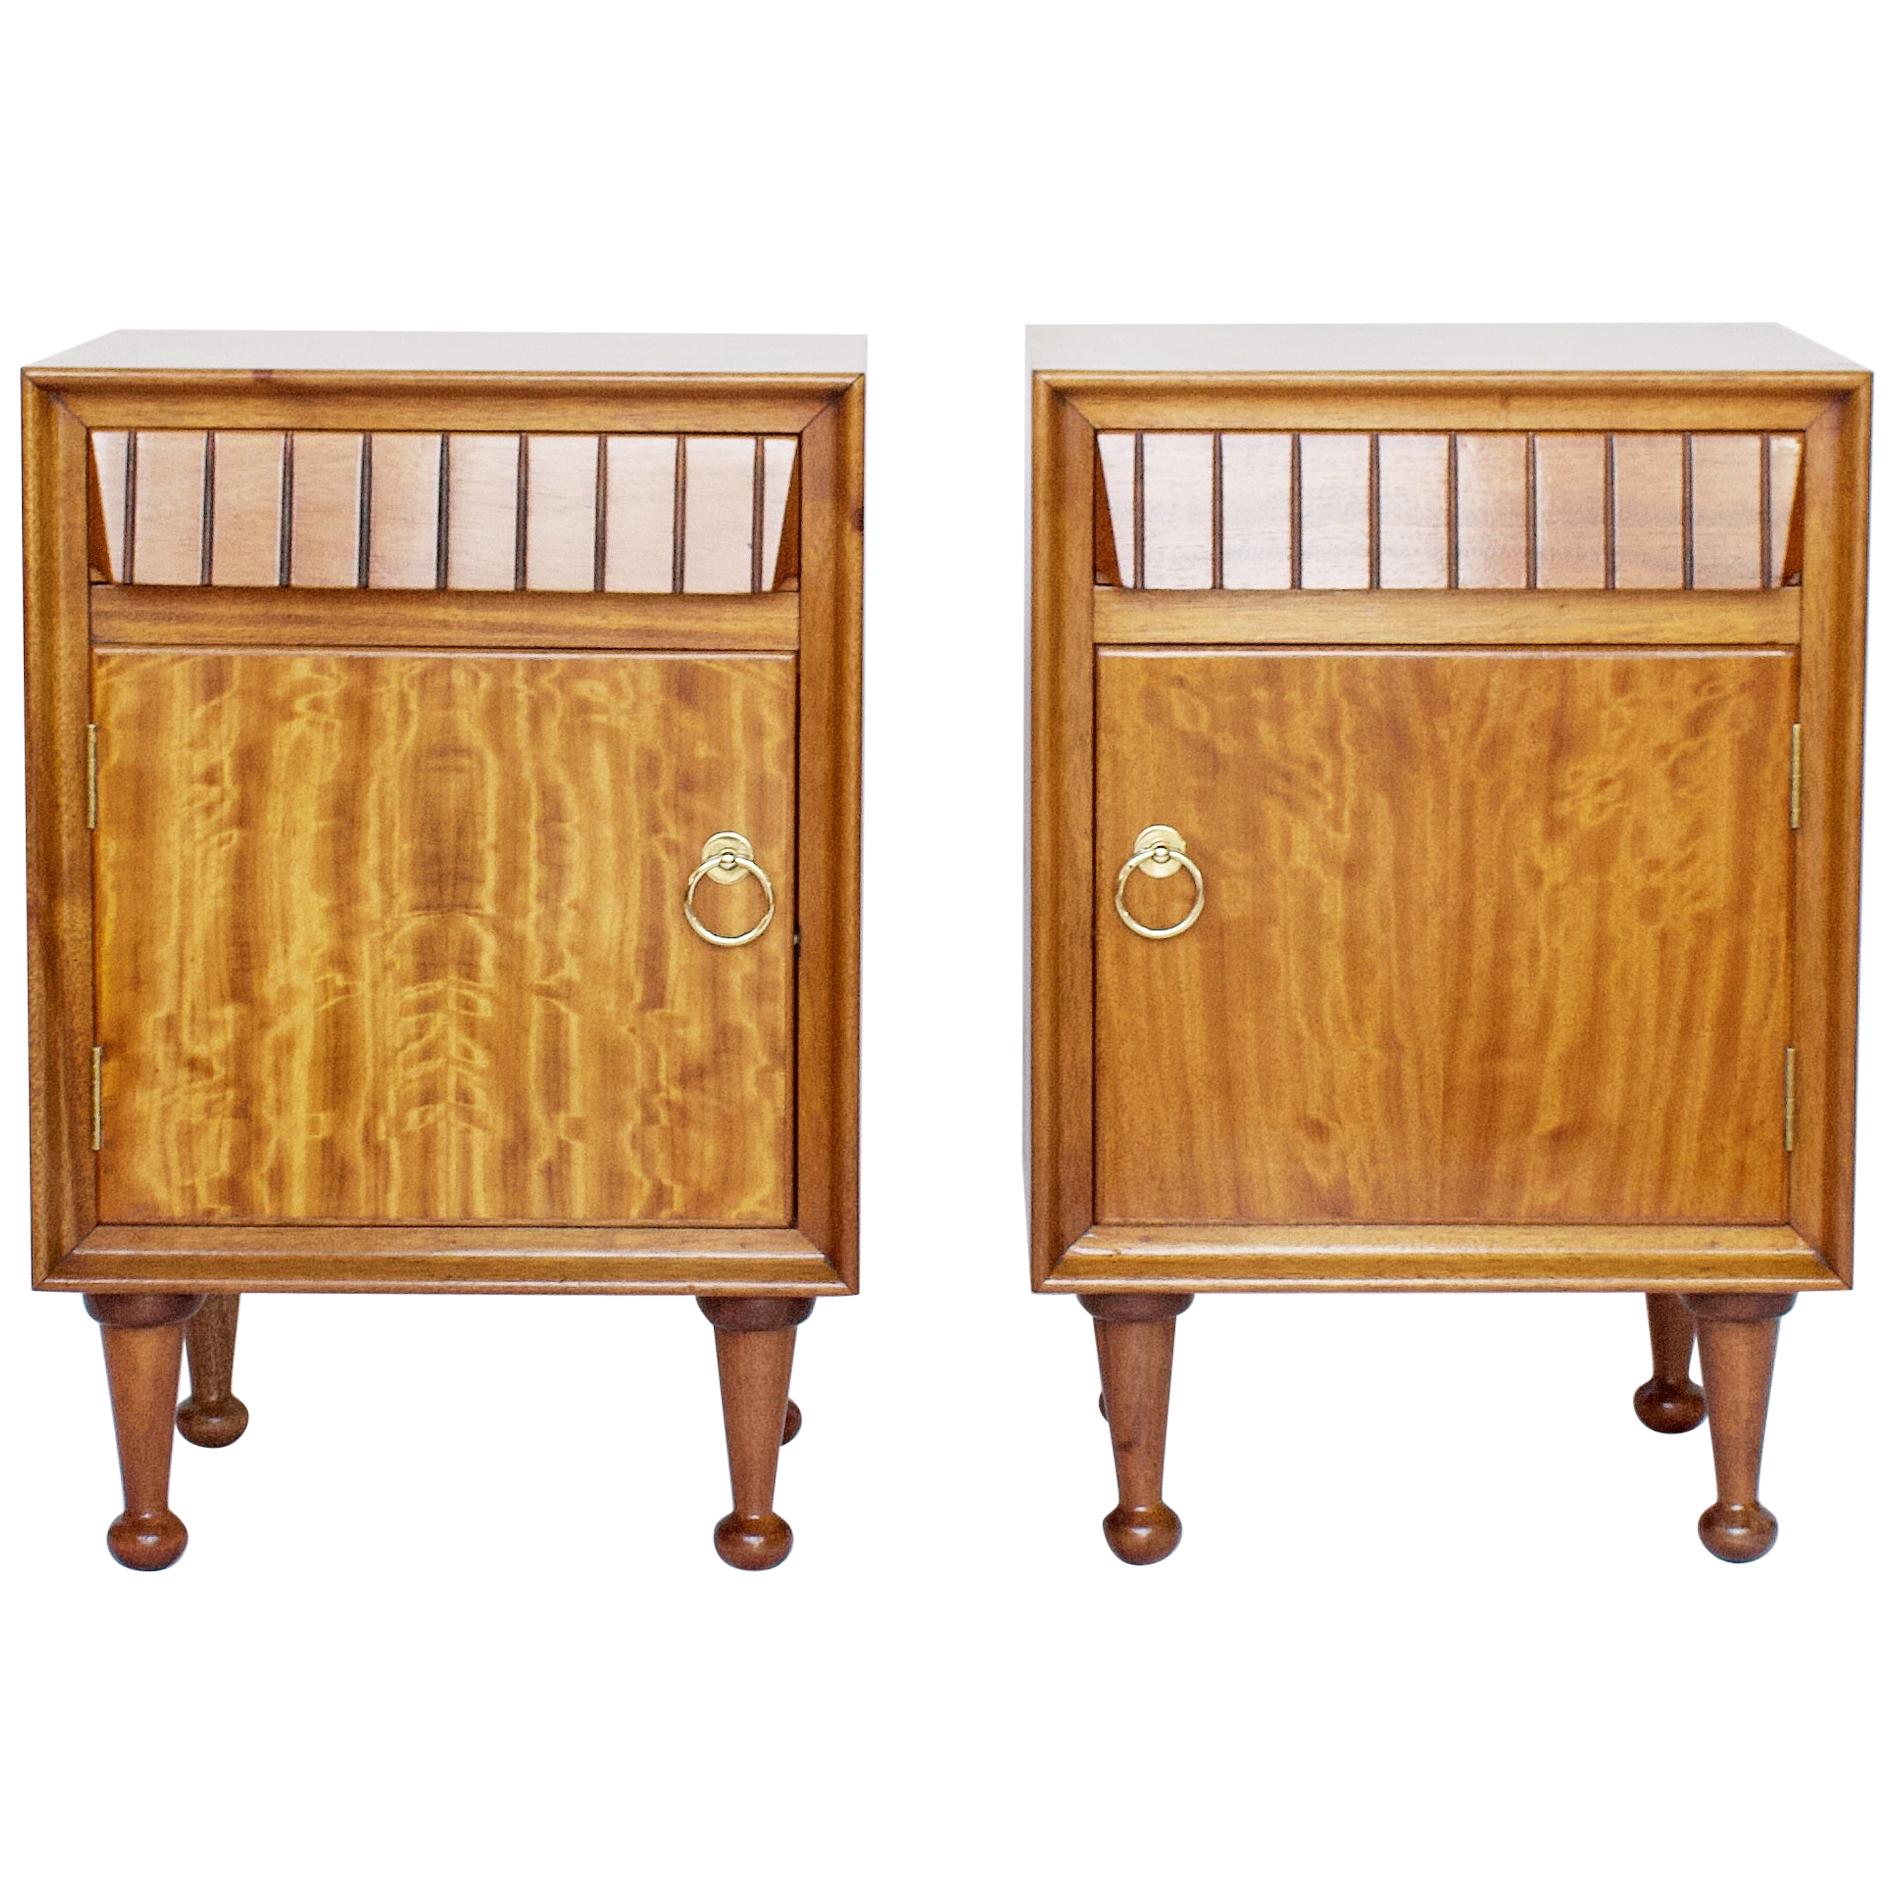 Pair of Bedside Cabinets by Heal's of London, circa 1950 